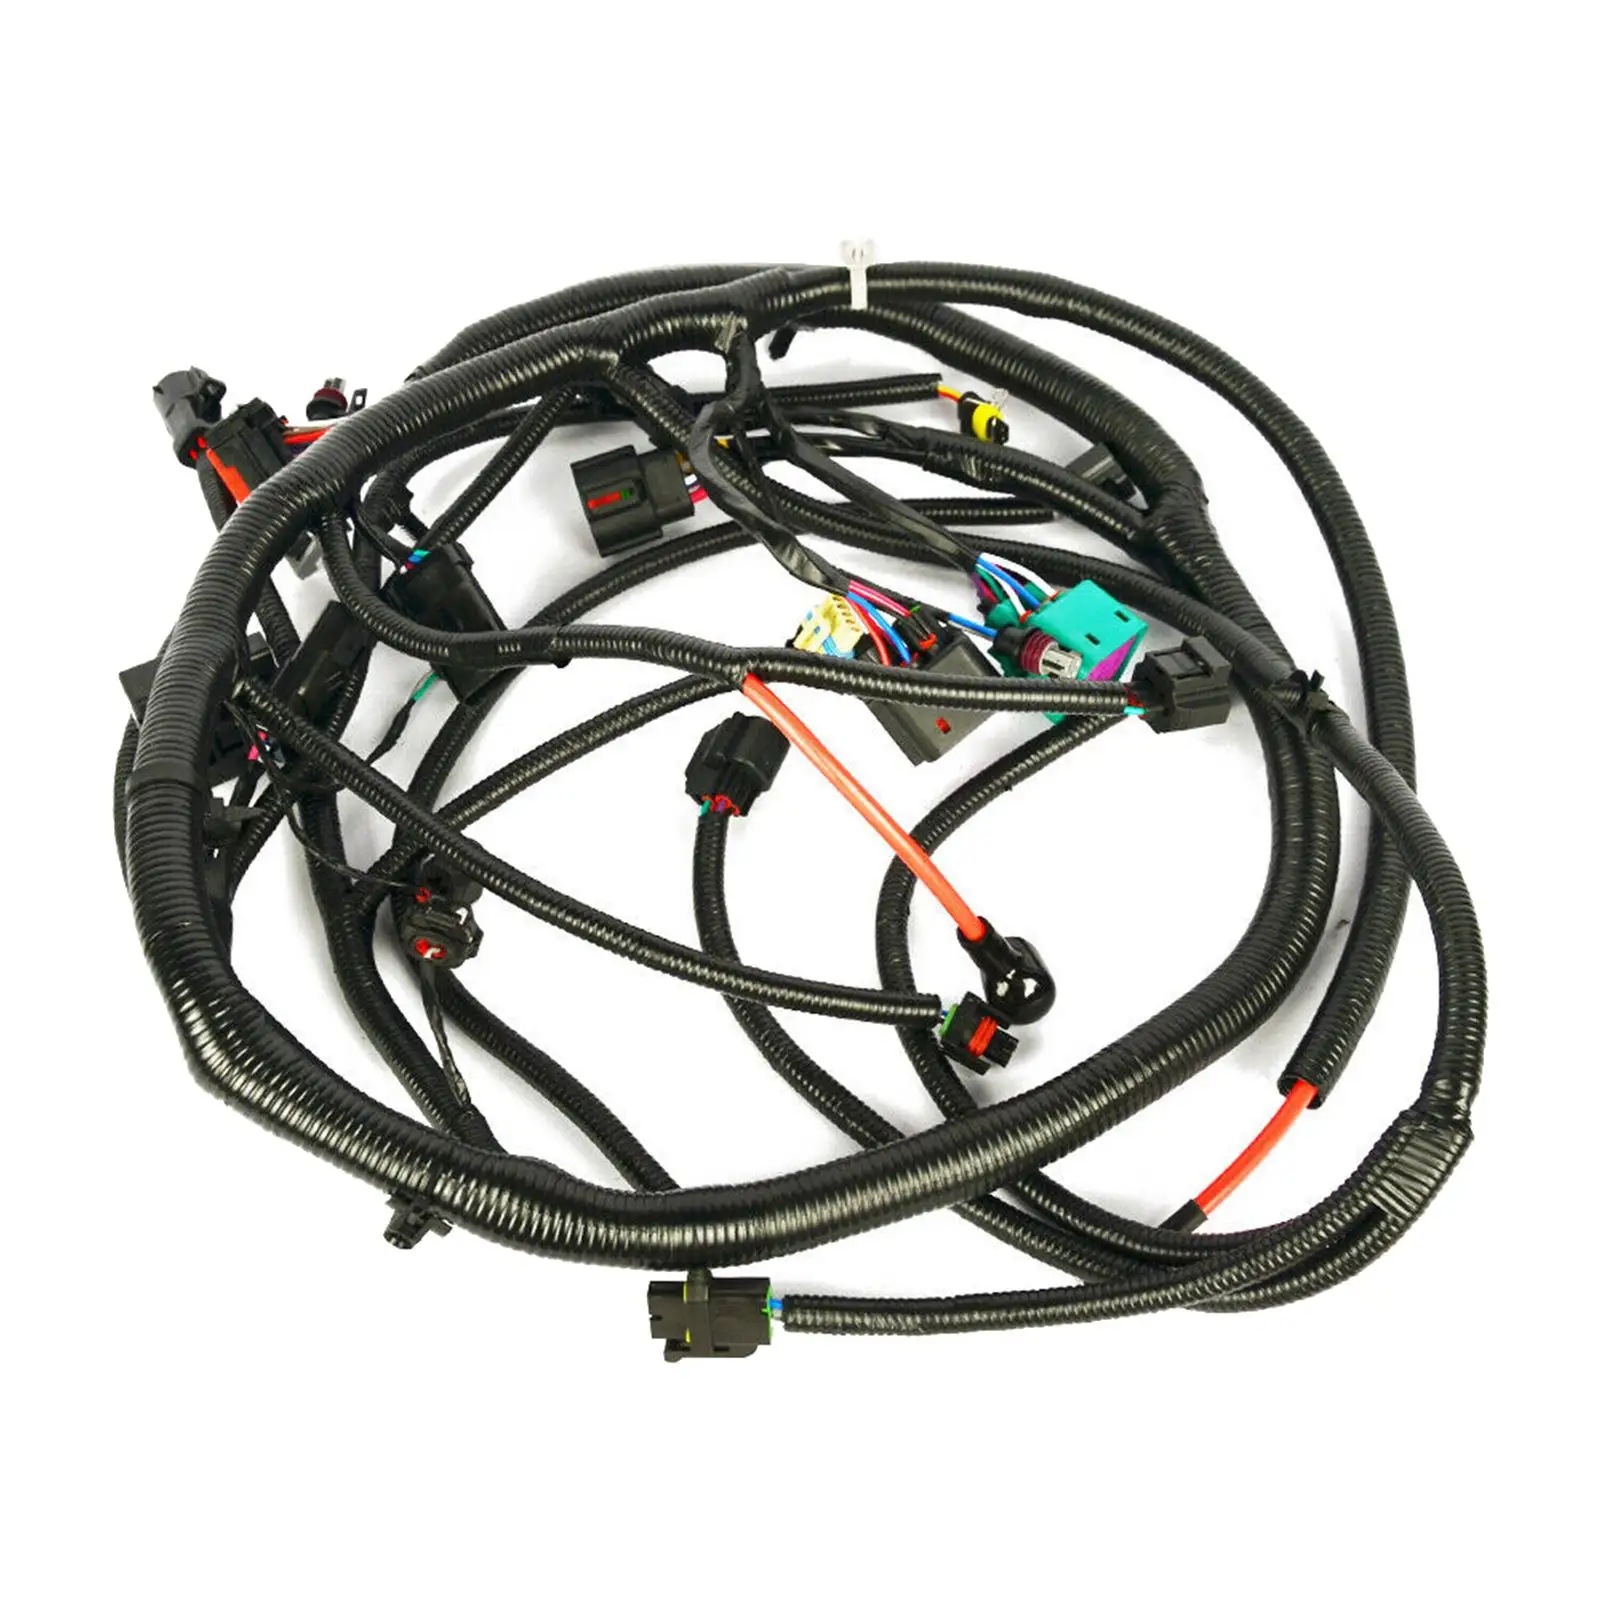 

Engine Wiring Harness Kit High Performance Automobile Fits for Ford Super Duty F250 F350